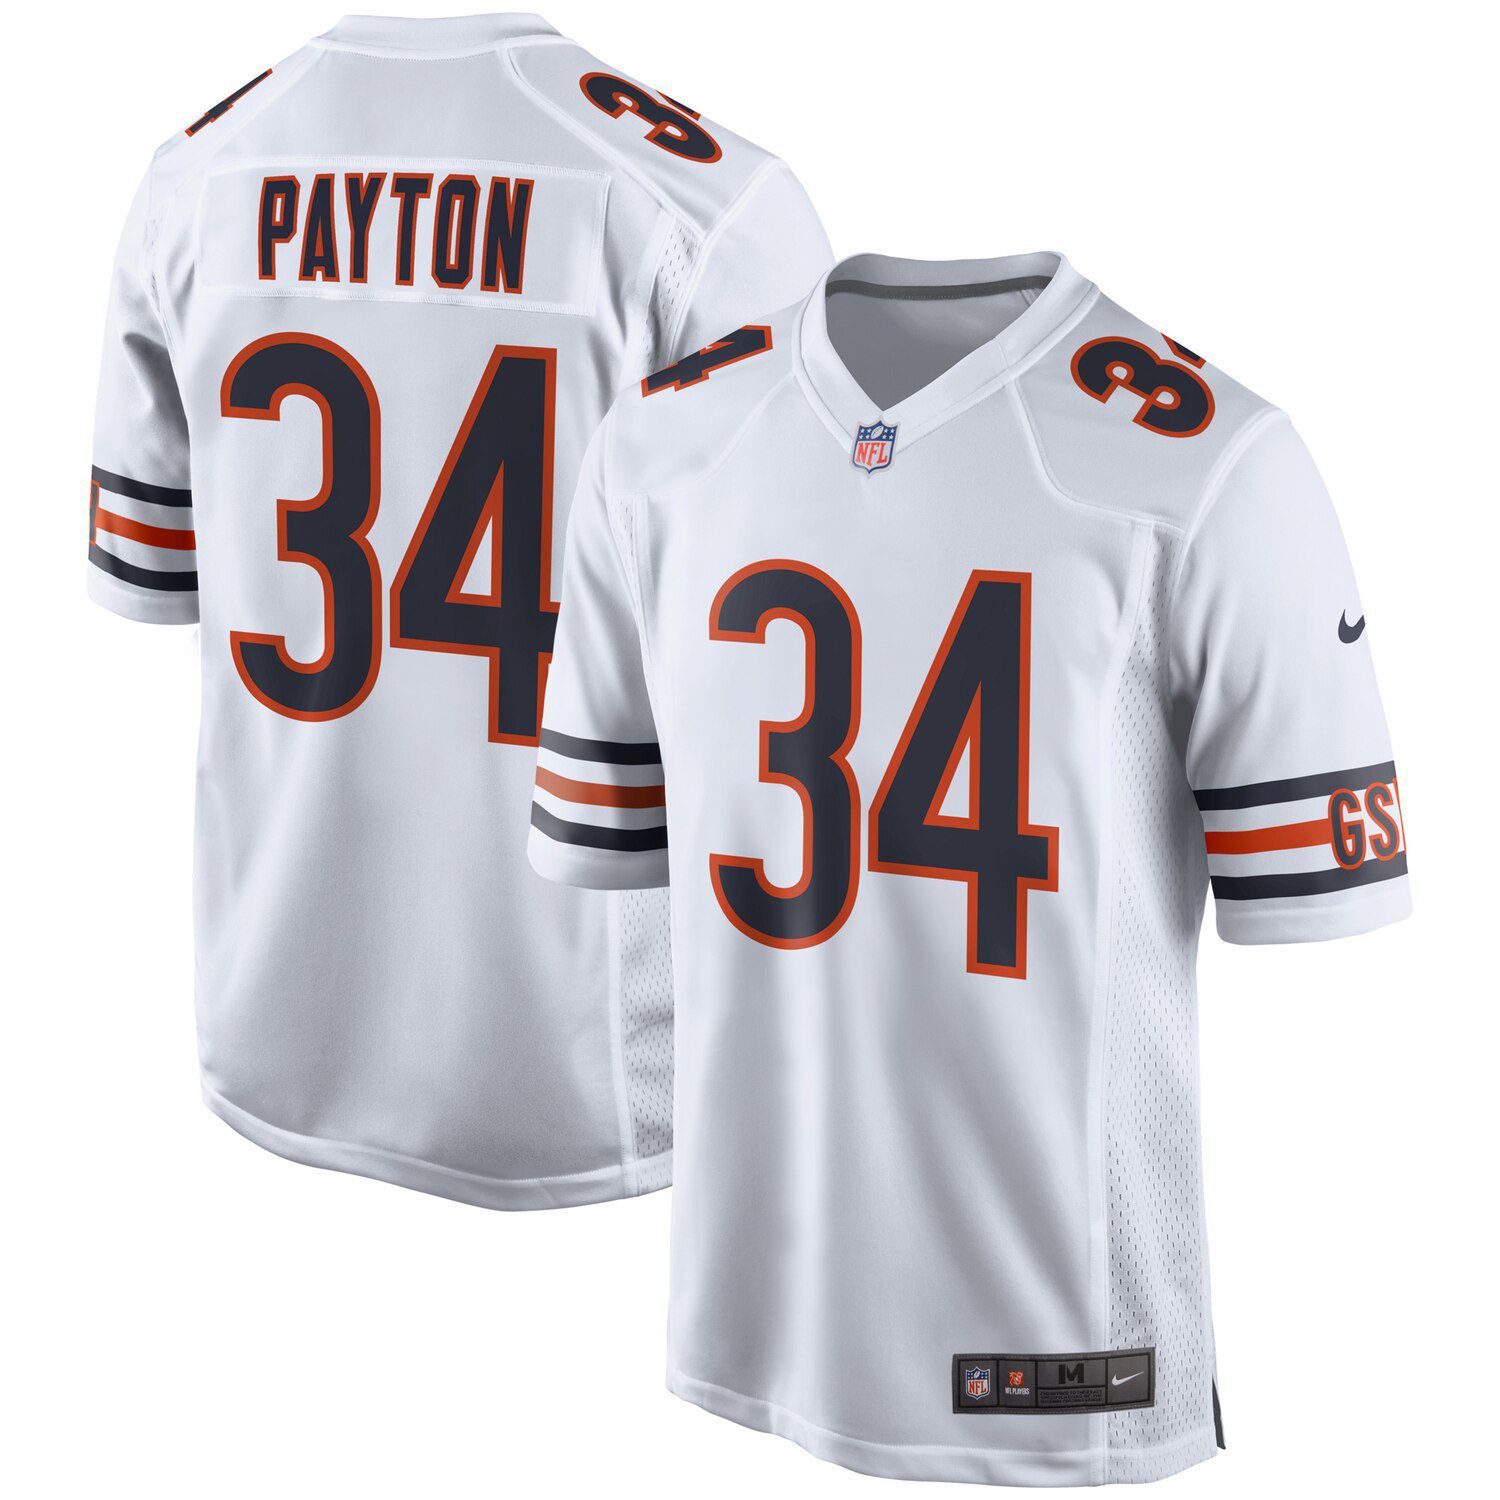 walter payton jersey for sale